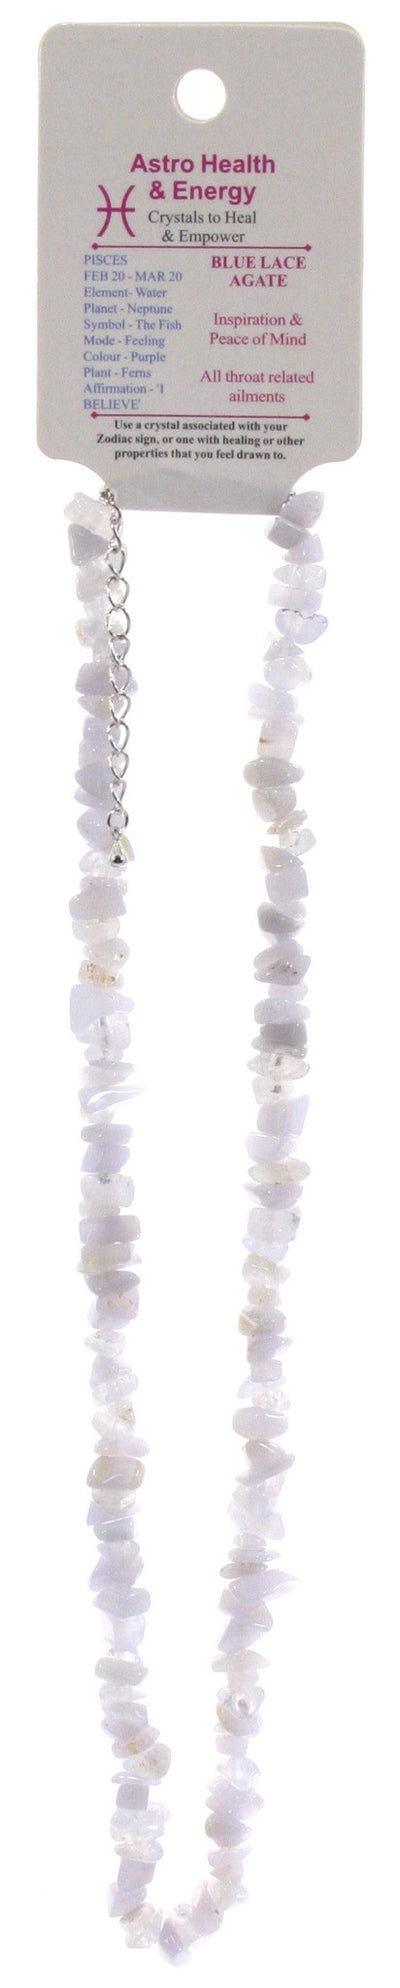 Blue Lace Agate Crystal Chip Horoscope Necklace - Star Sign Pisces